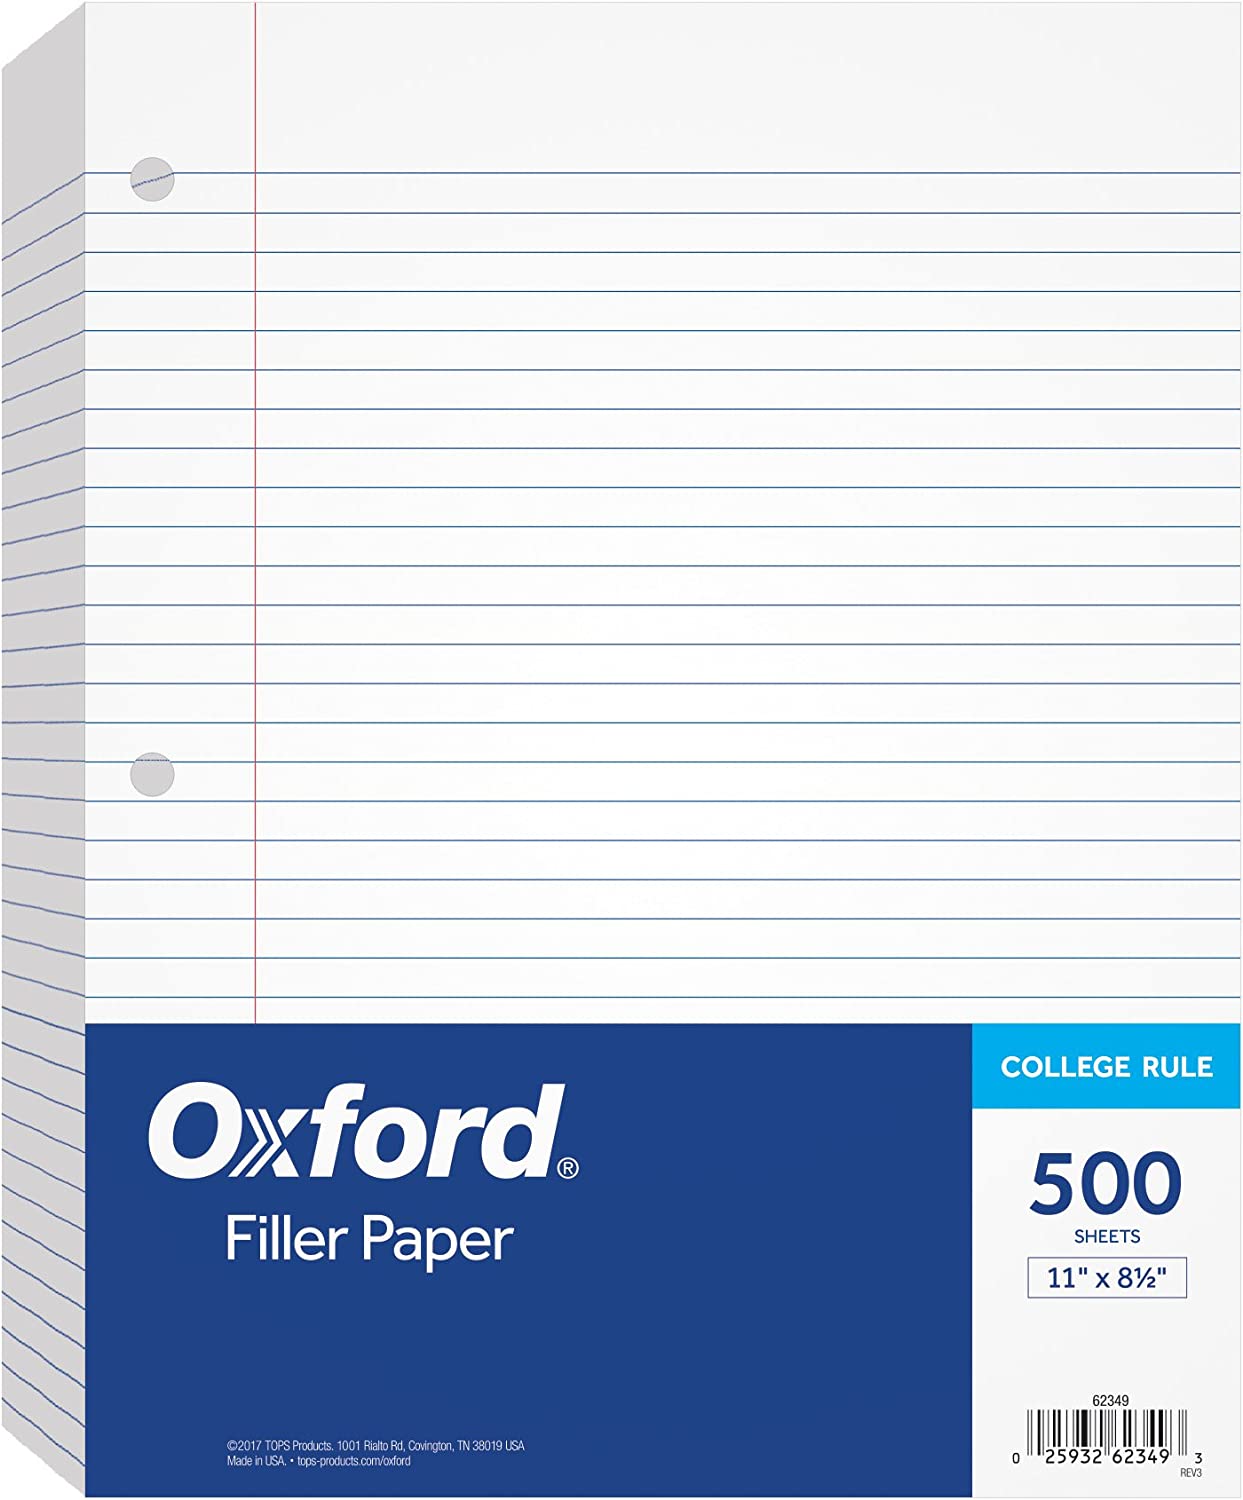 Oxford Filler Paper, 8-1/2" x 11", College Rule, 3-Hole Punched 21